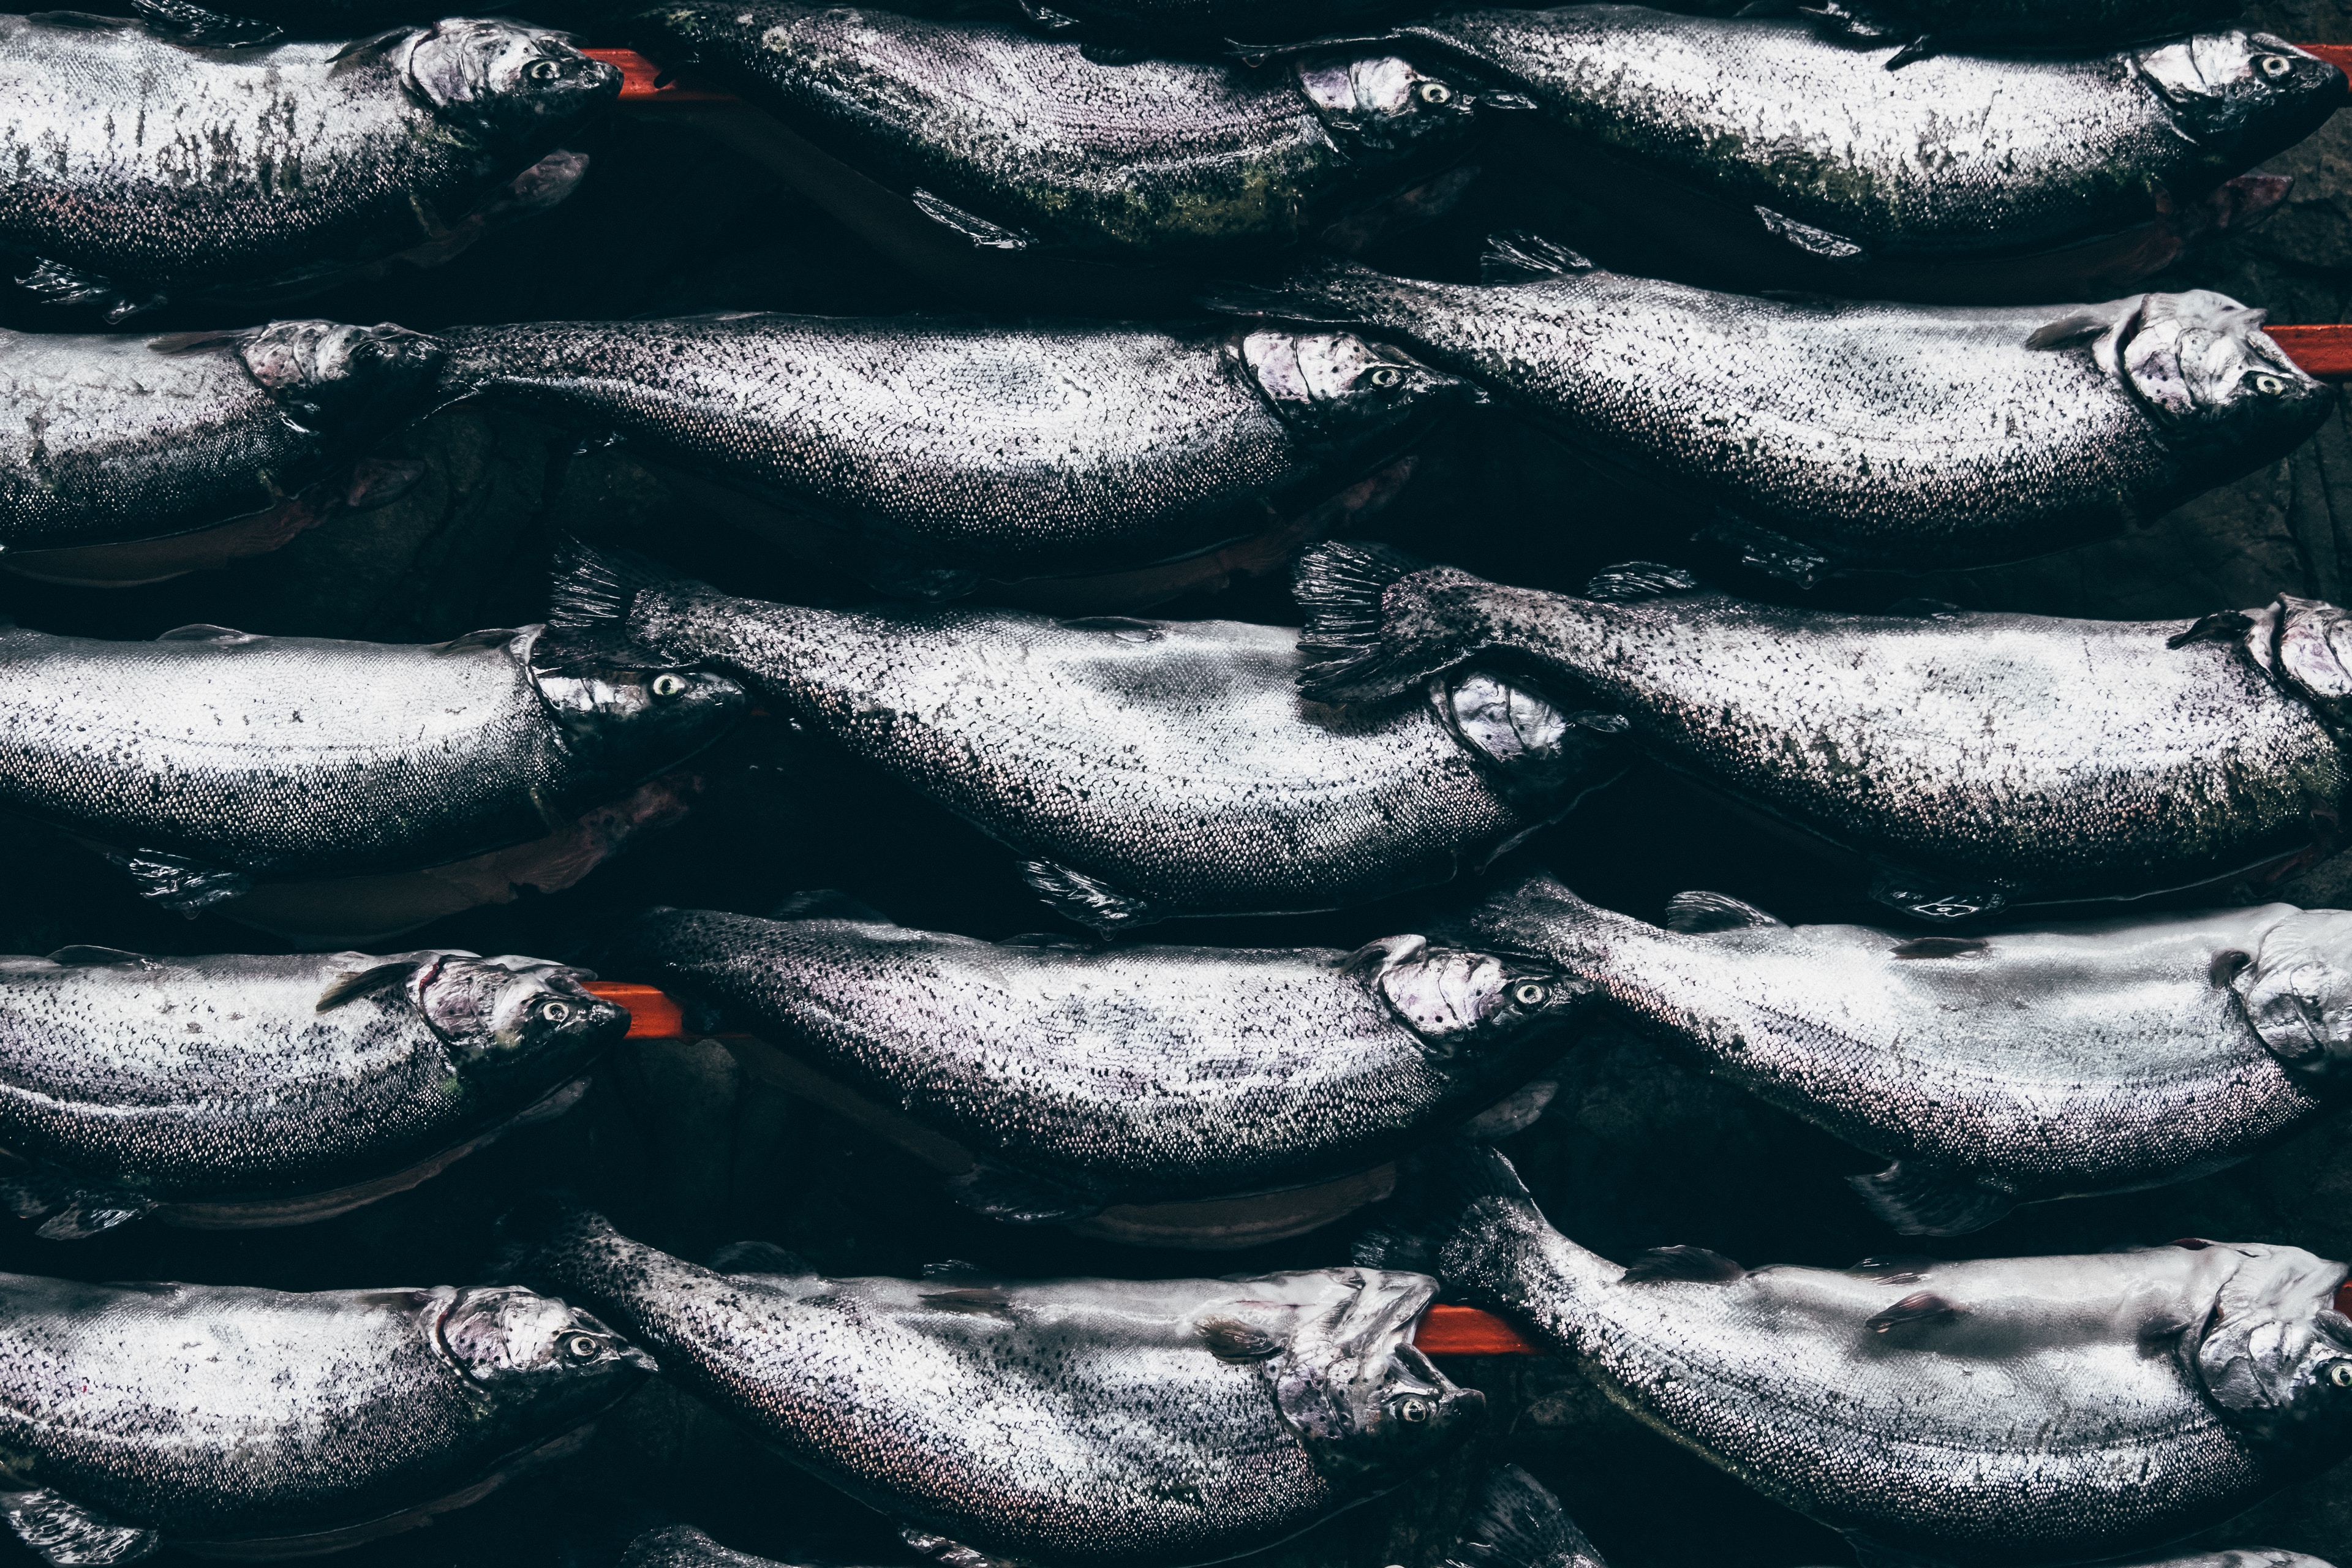 8 Strategies Wholesale Seafood Distributors and Importers Should Use to Weather the Storms of the Seafood Supply Chain